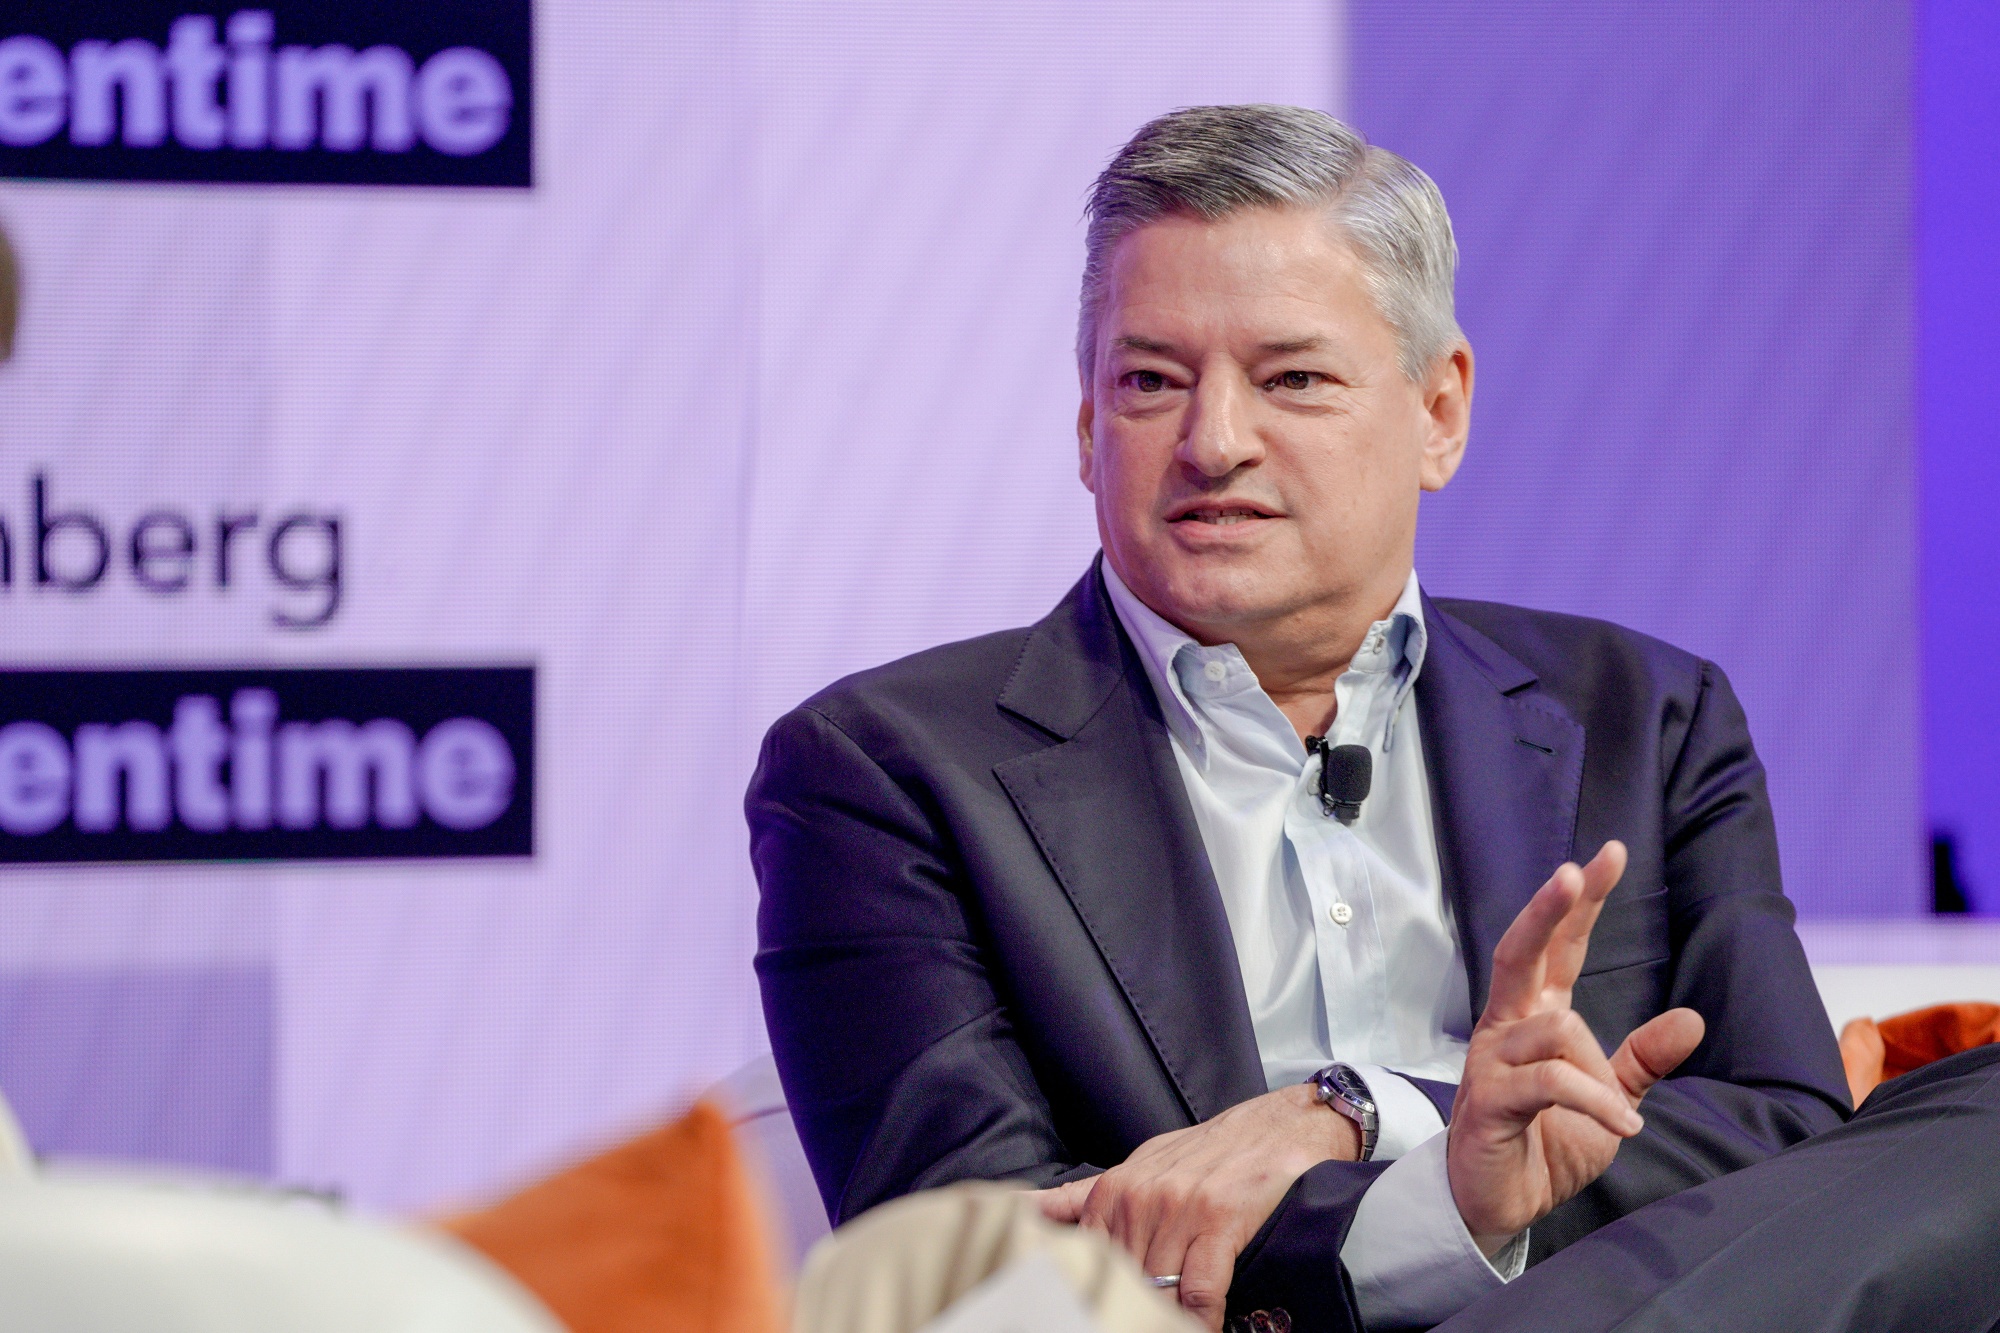 Ted Sarandos, president and co-chief executive office of Netflix Inc., during the Bloomberg Screentime event in Los Angeles, California, US, on Thursday, Oct. 12, 2023. The event gathers moguls, celebrities, and entrepreneurs to discuss the future of cinema, the boom in streaming audio and video, the latest sports and gaming experiences, and the potential impact of artificial intelligence.